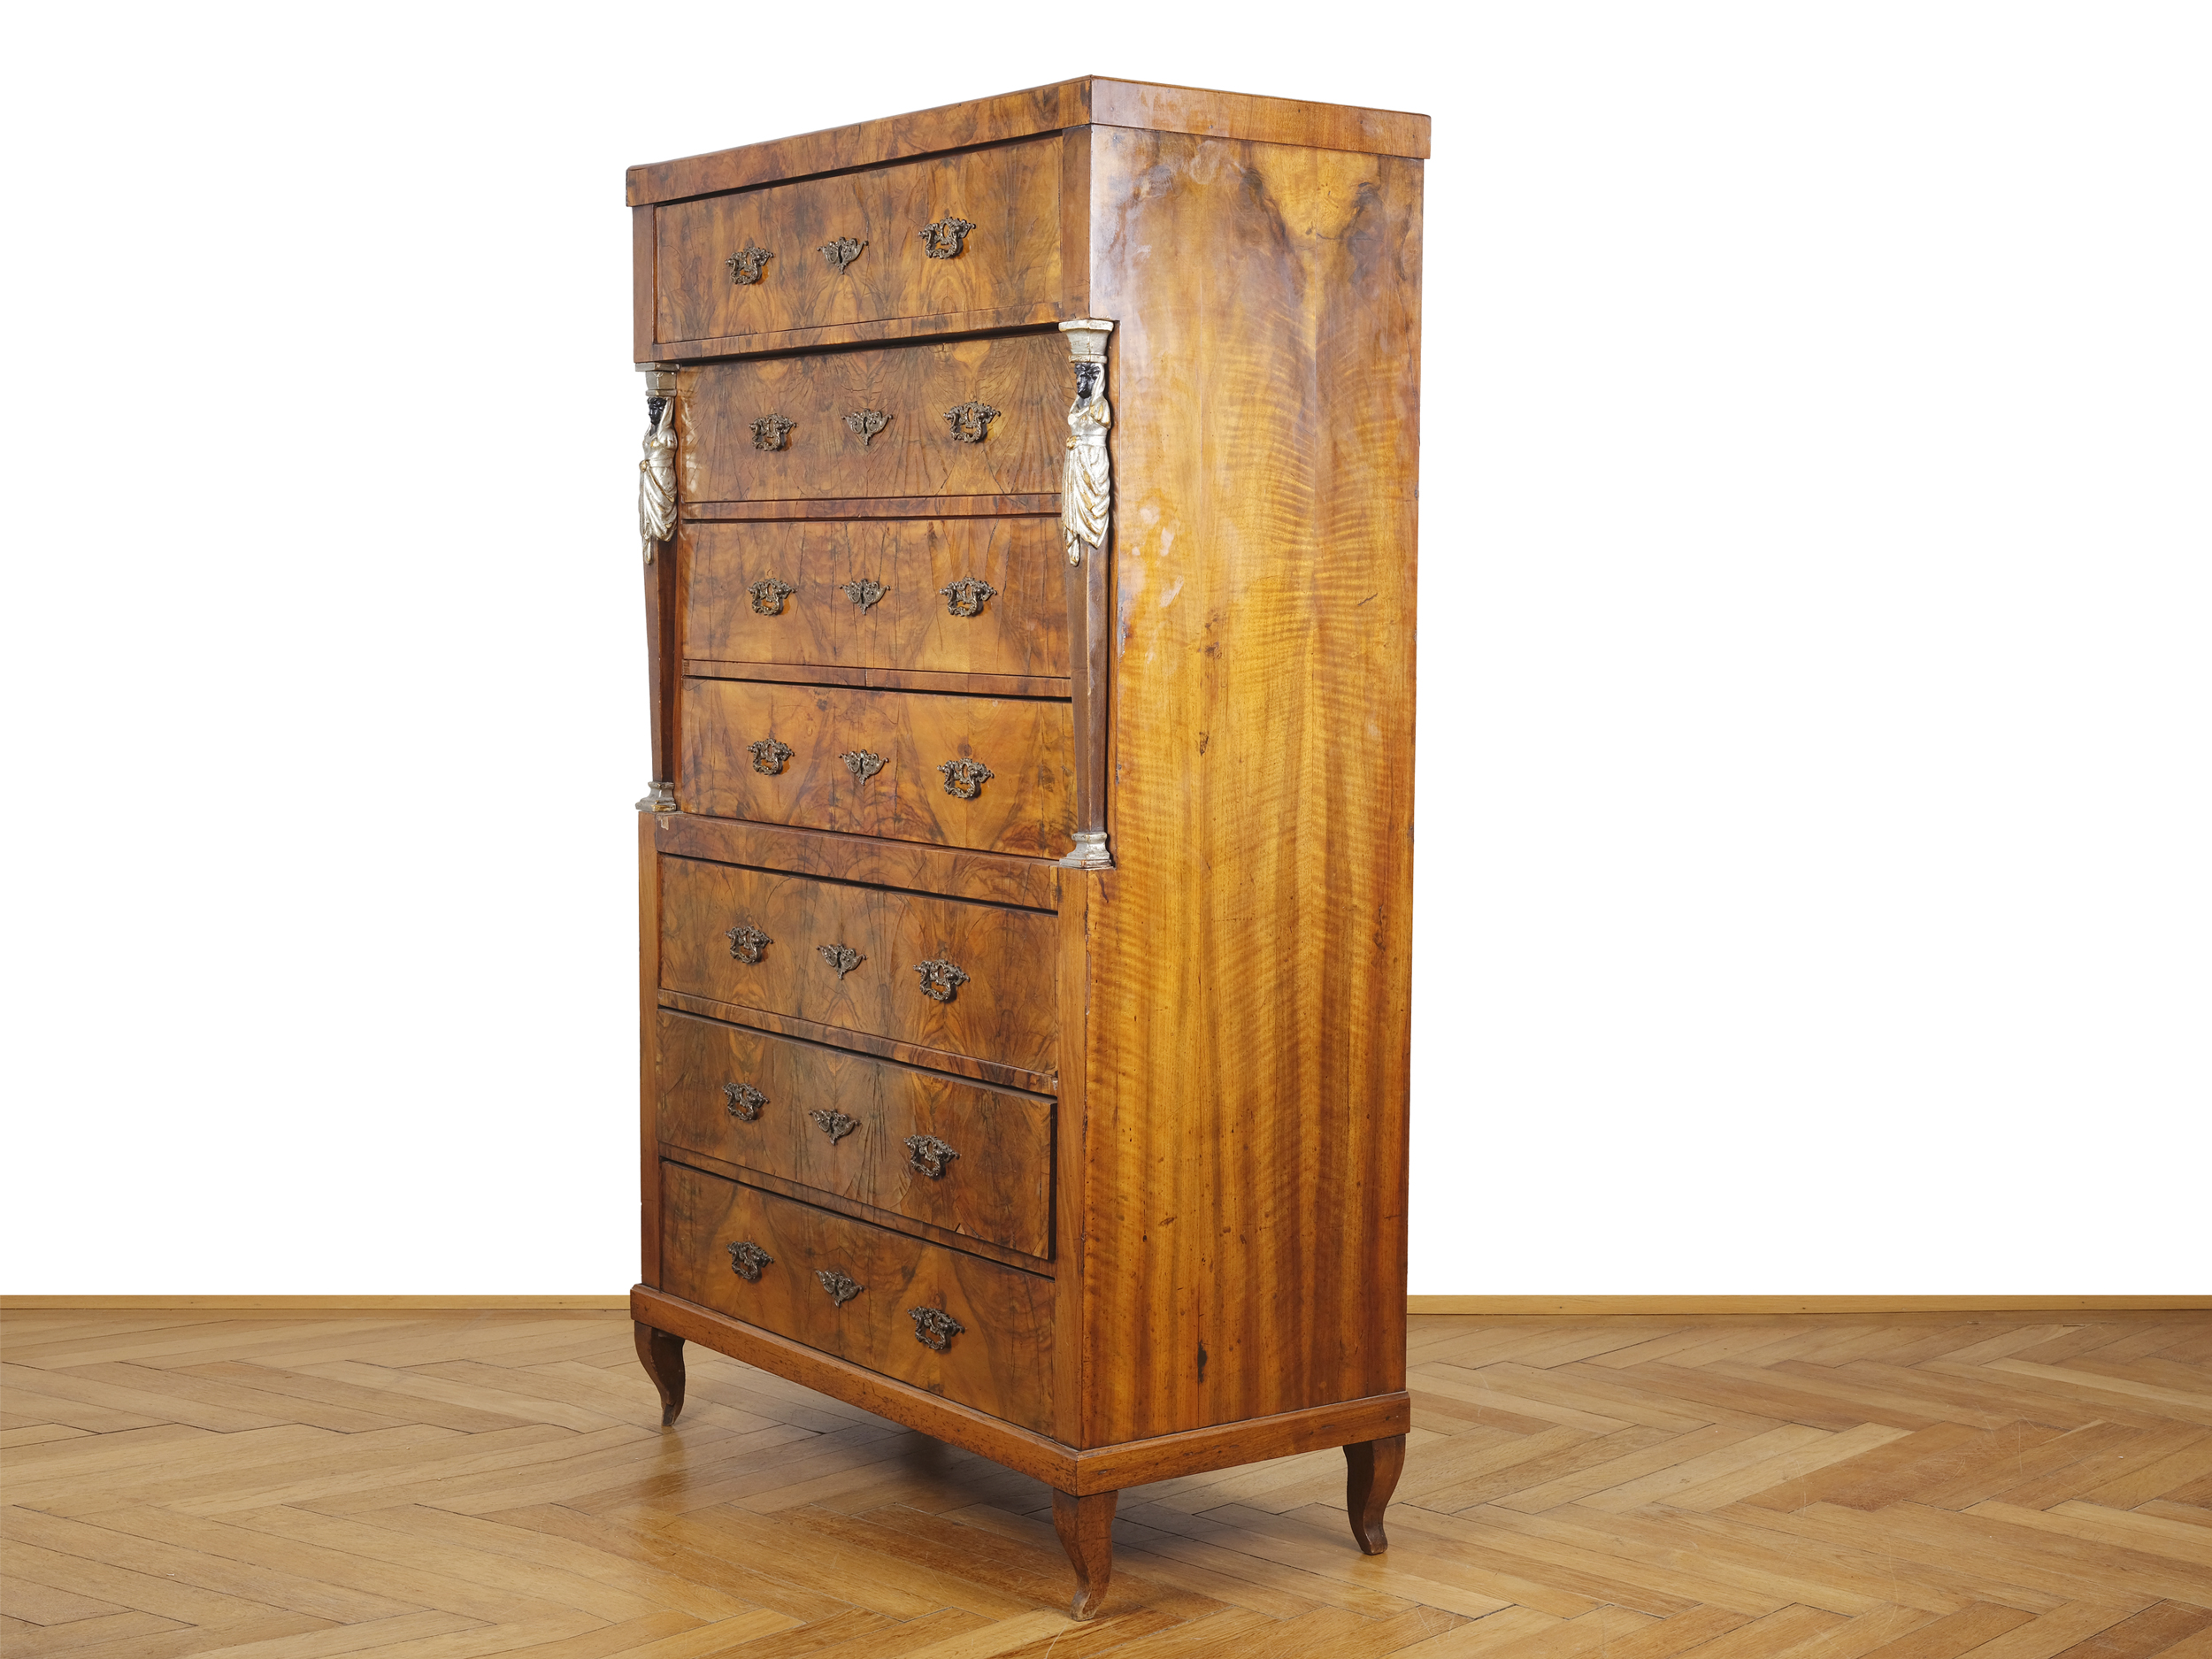 Empire chest of drawers with two side caryatids, 7 drawers, Danube Monarchy, around 1820/30 - Image 2 of 8